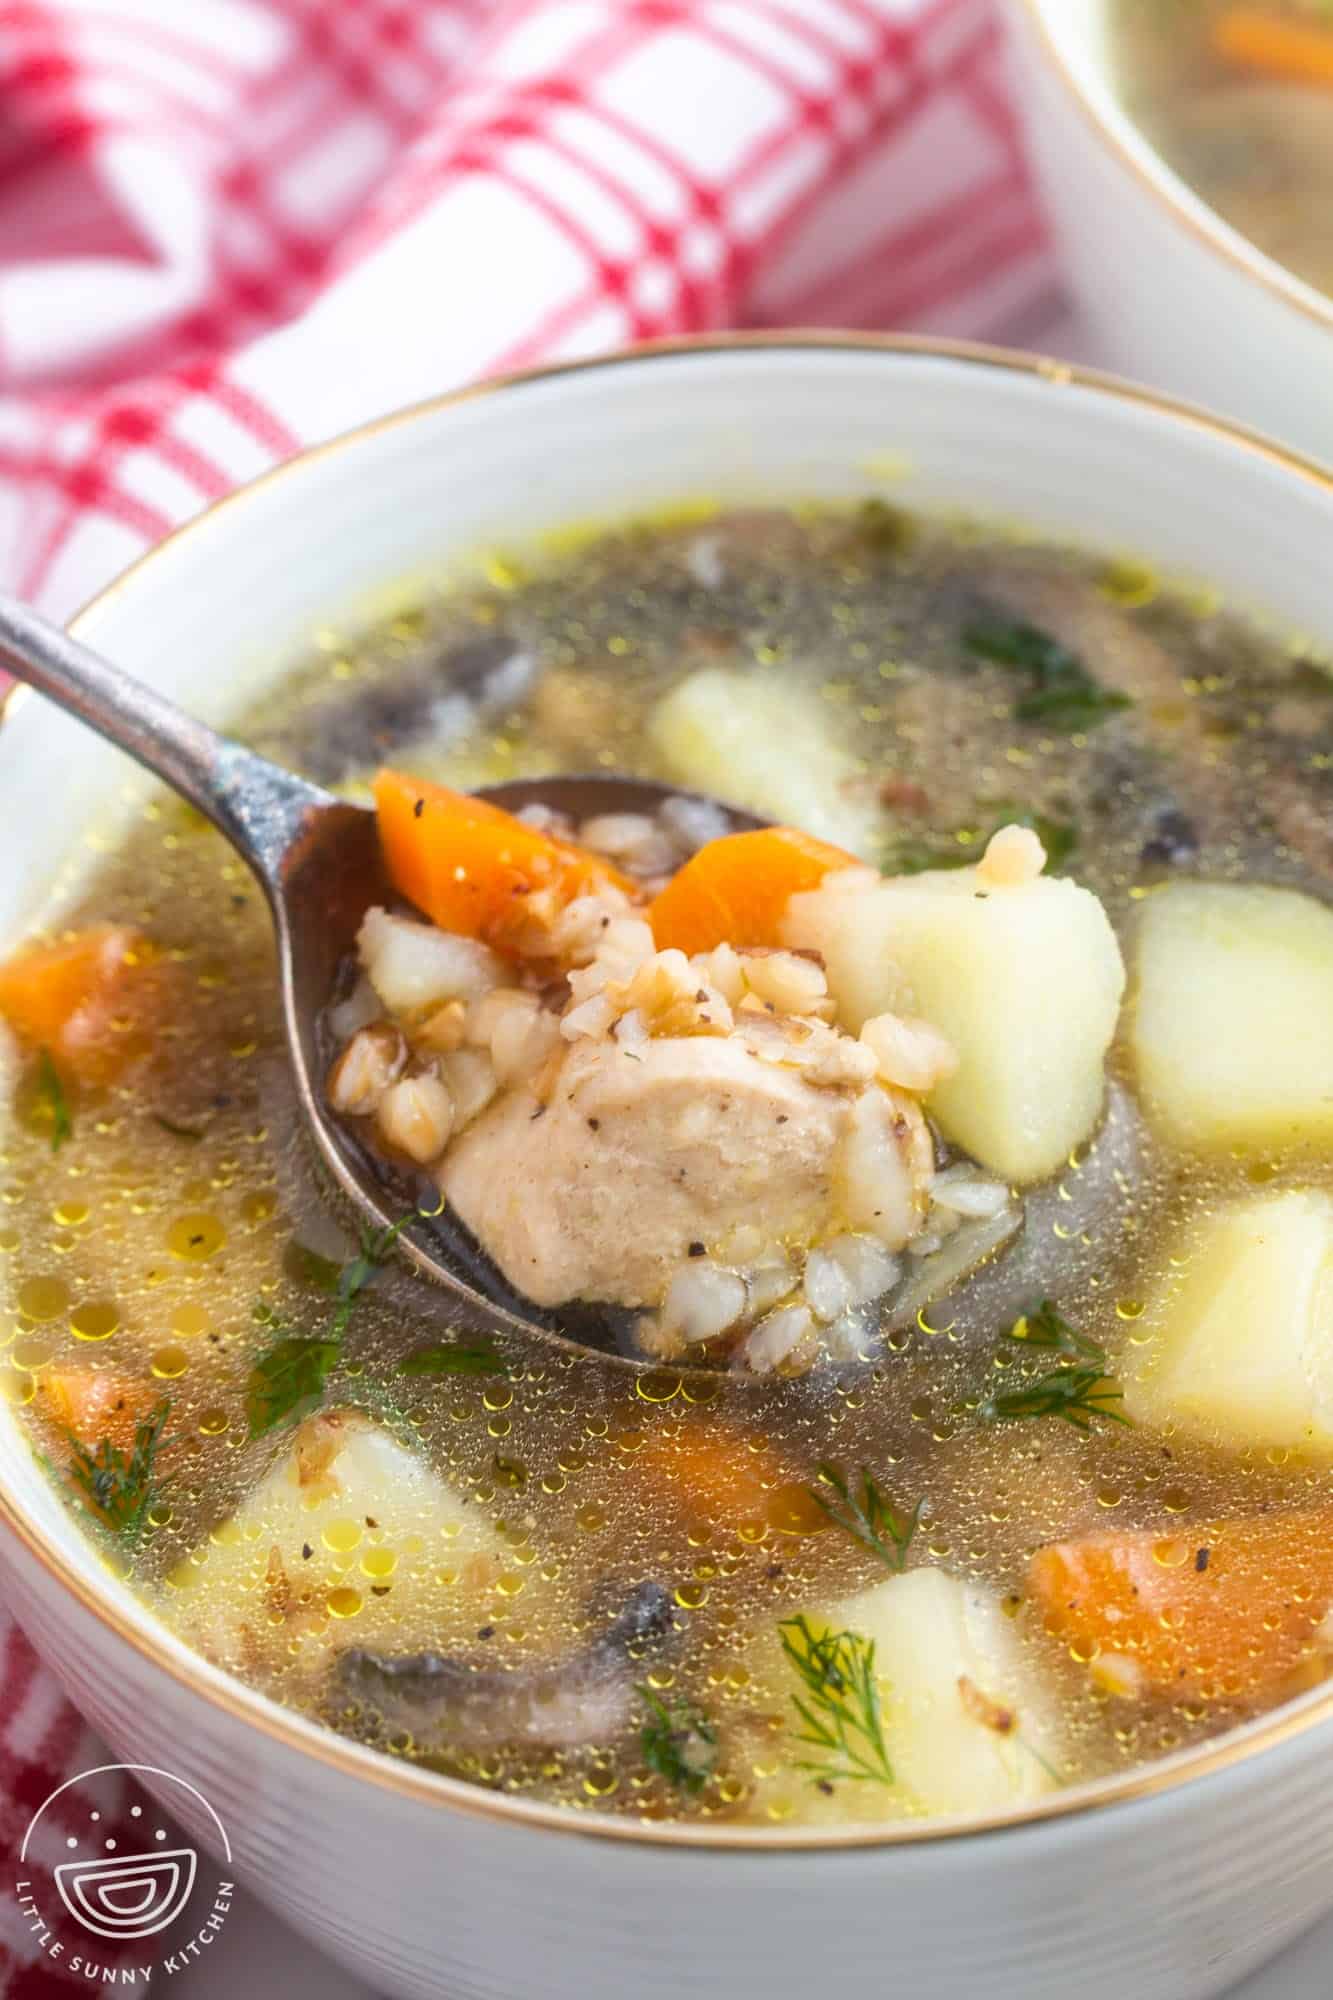 A spoonful of buckwheat soup with chicken, potatoes, and carrot.